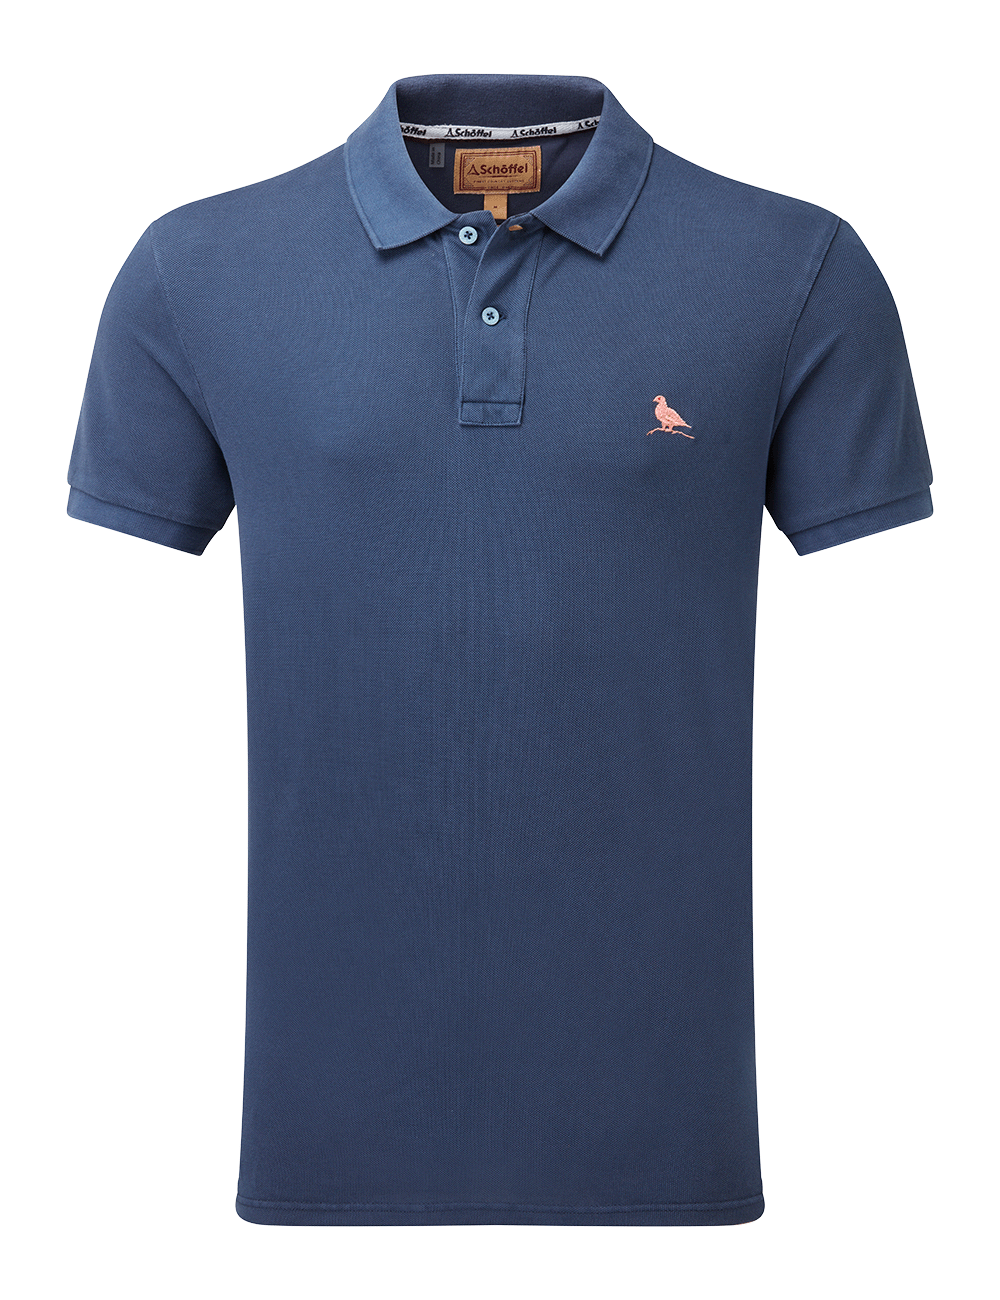 Schoffel St. Ives Garment Dyed Polo Shirt - French Navy